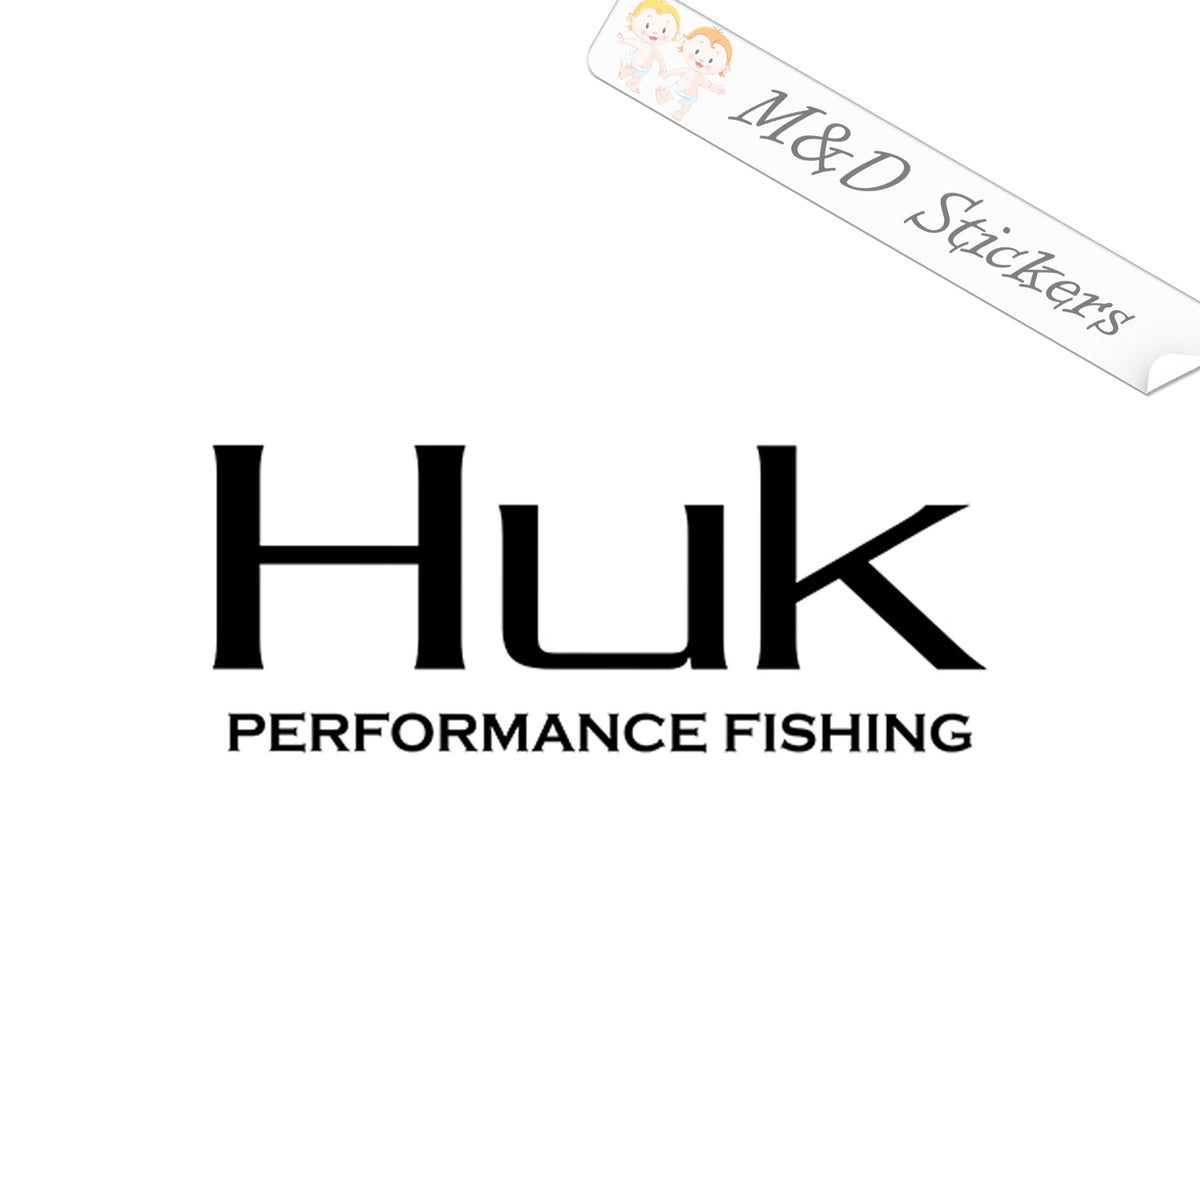 2x Huk fishing Logo Vinyl Decal Sticker Different colors & size for Ca